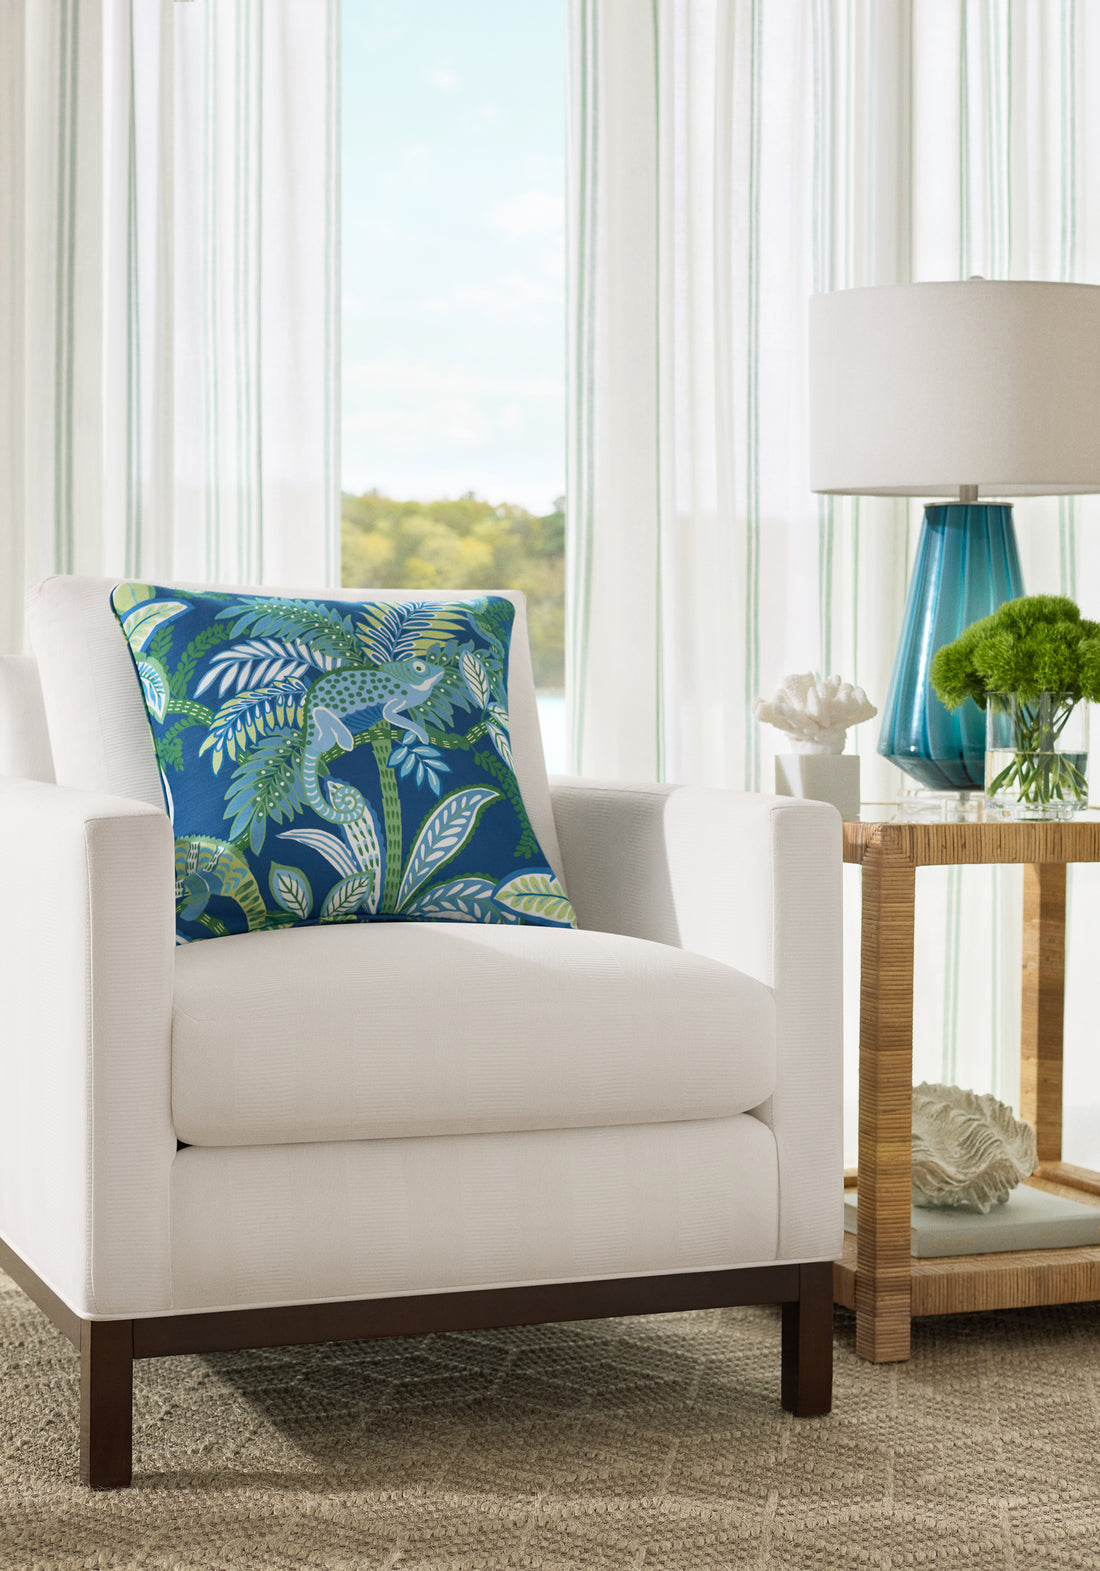 Pillow in iggy fabric in coastal color - pattern number F81677 - by Thibaut fabrics in the Locale collection